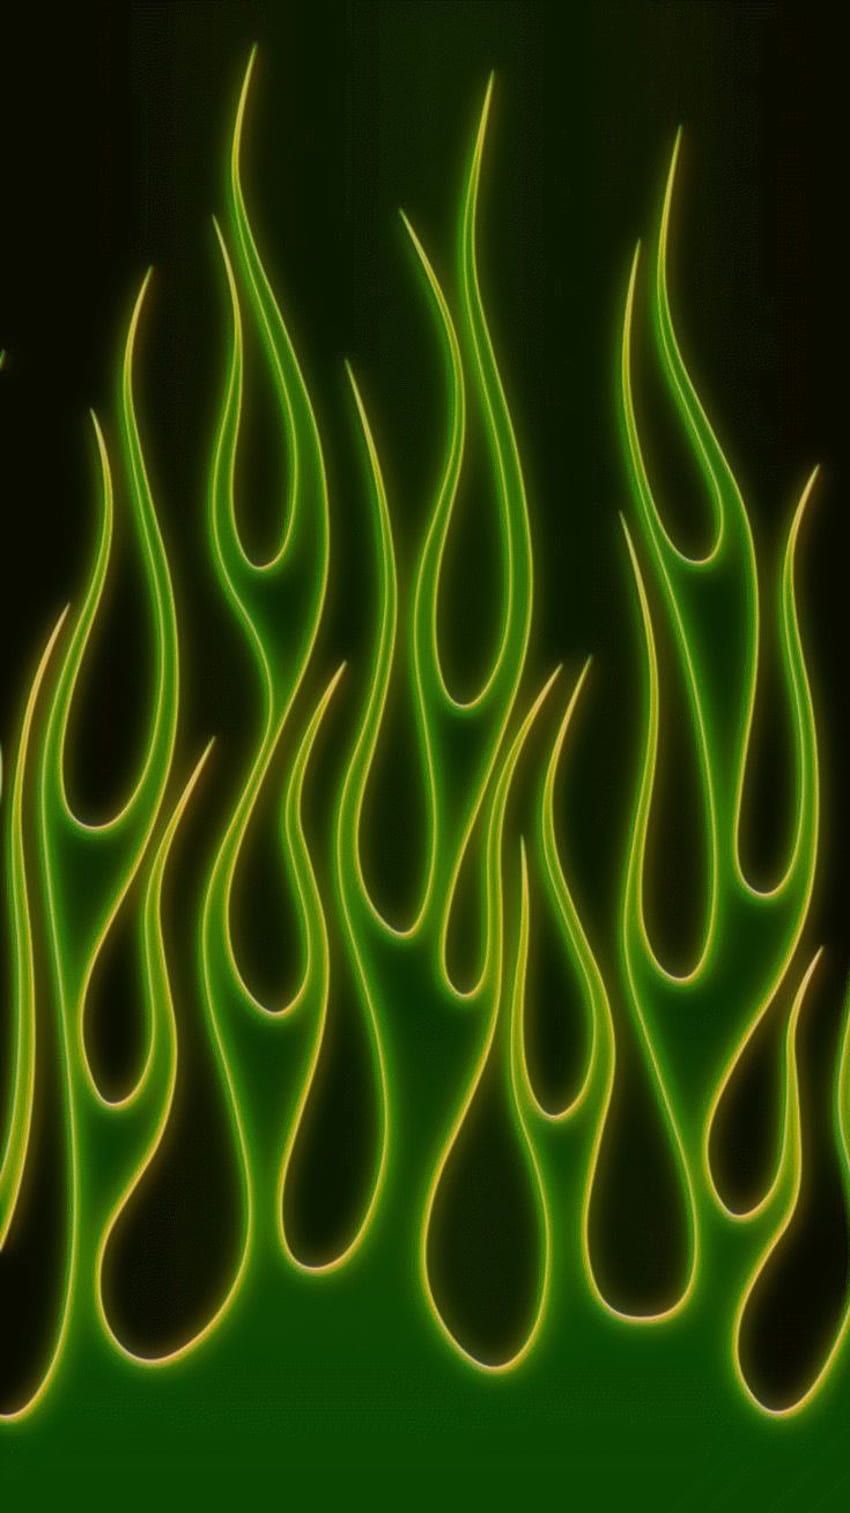 Neon green flames on a black background - Flames, dark green